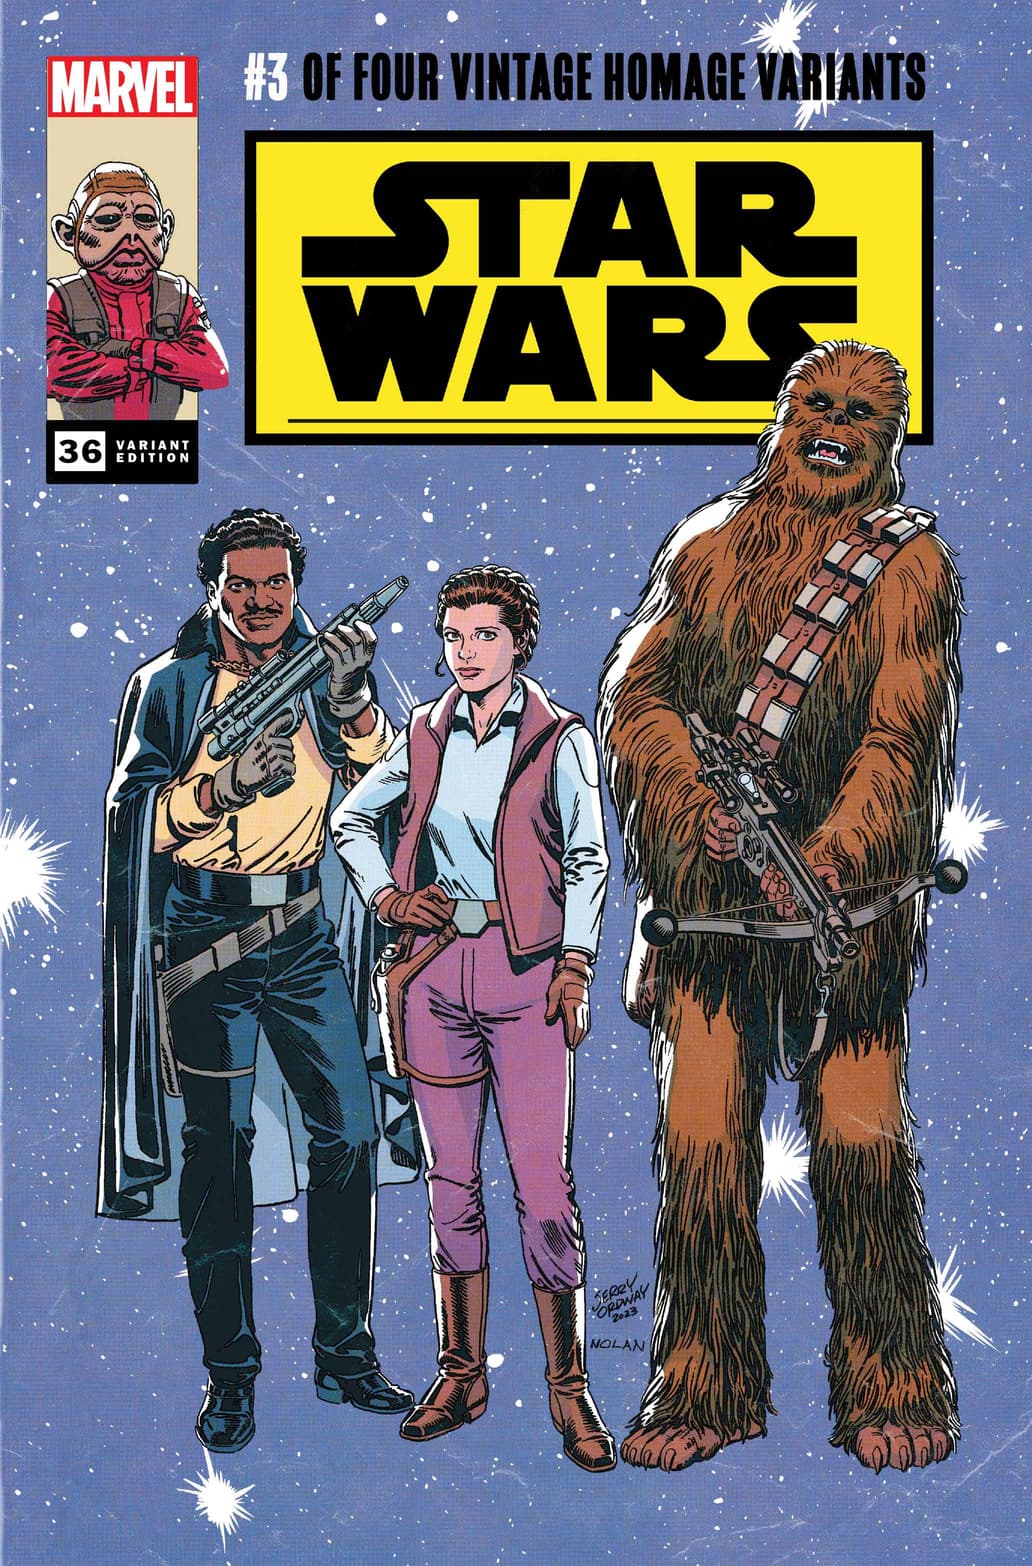 STAR WARS #36 Classic Trade Dress Variant Cover by Jerry Ordway and Nolan Woodward